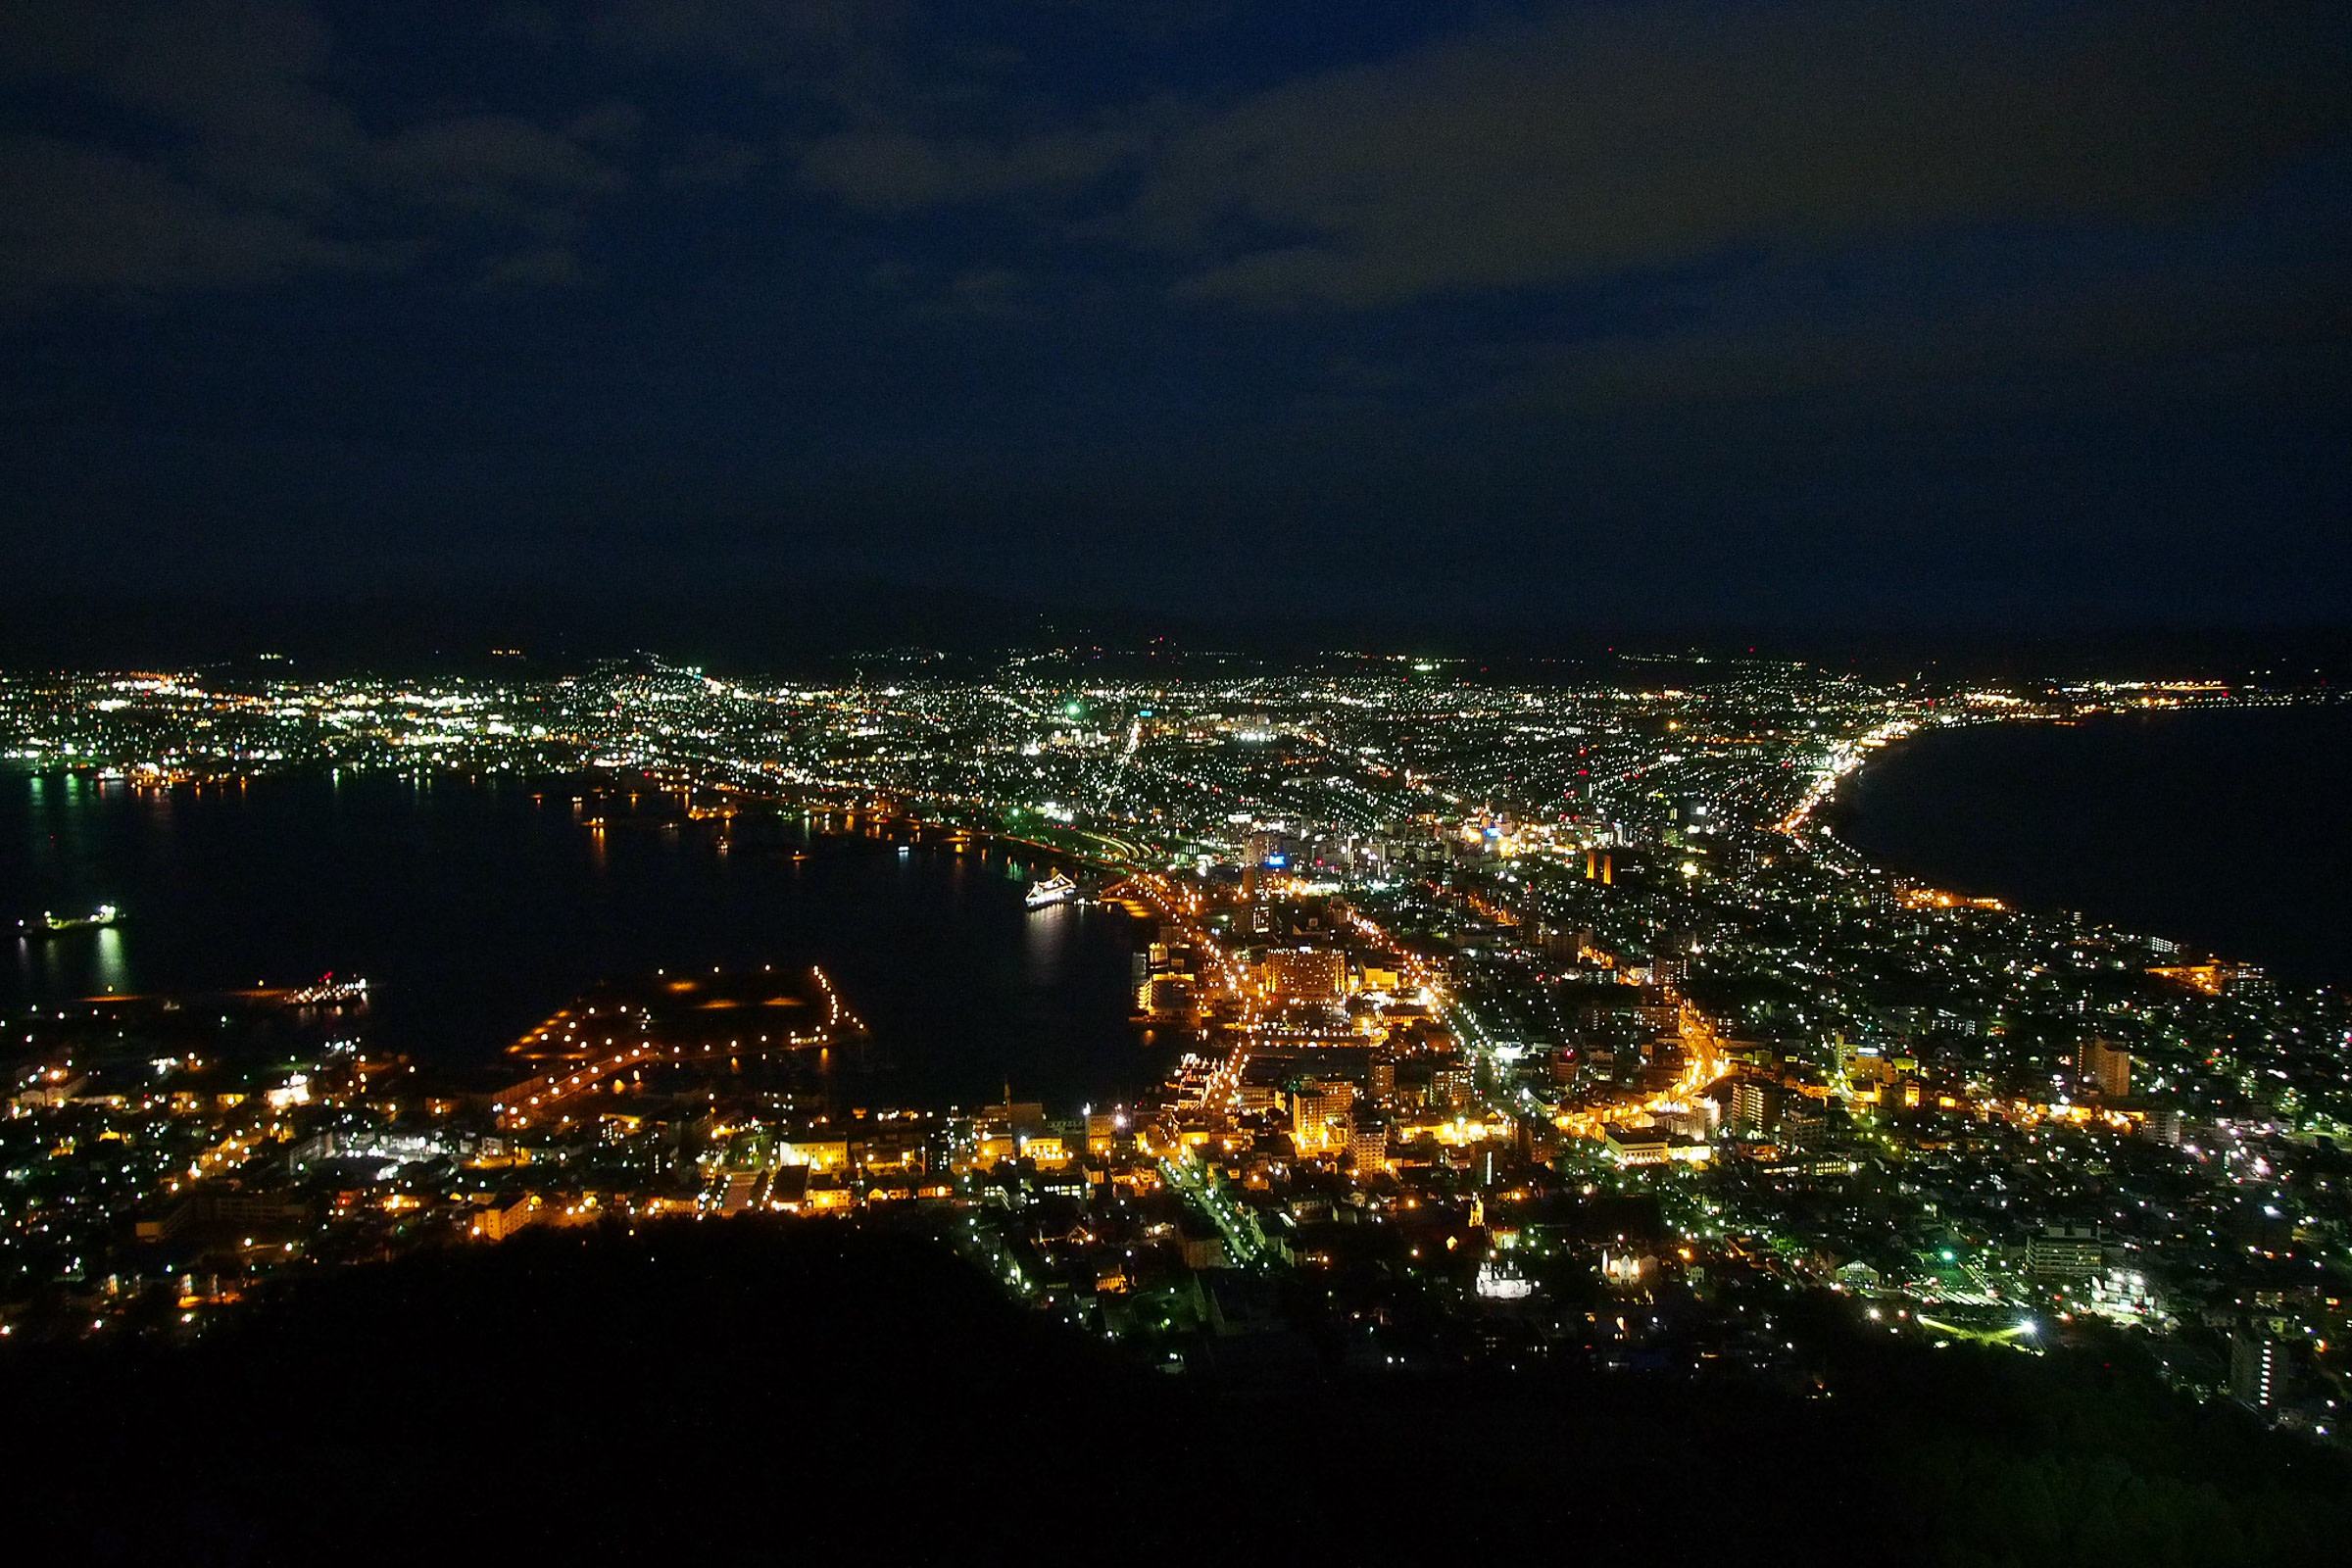 A night view of Hakodate. It is dark but the city below is lit up brightly.